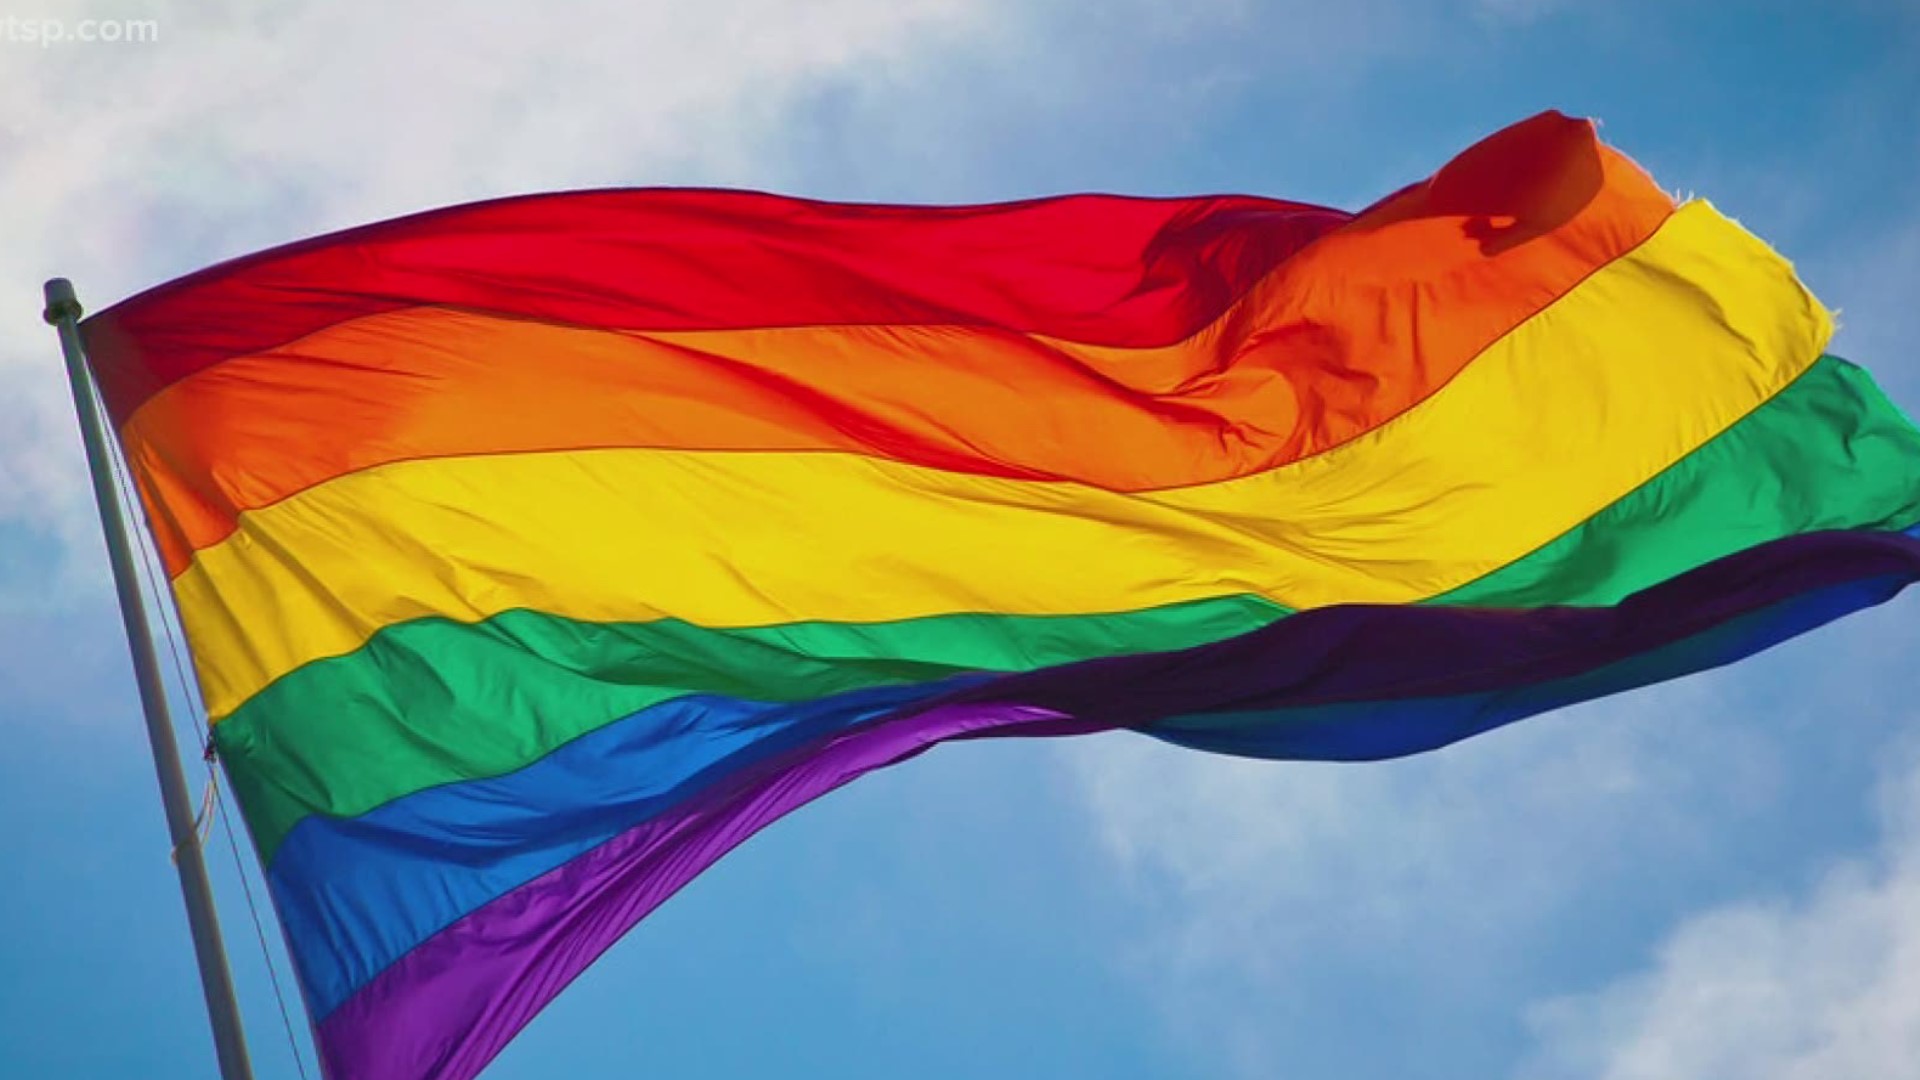 2020 marks 51 years of LGBTQ pride in the United States.